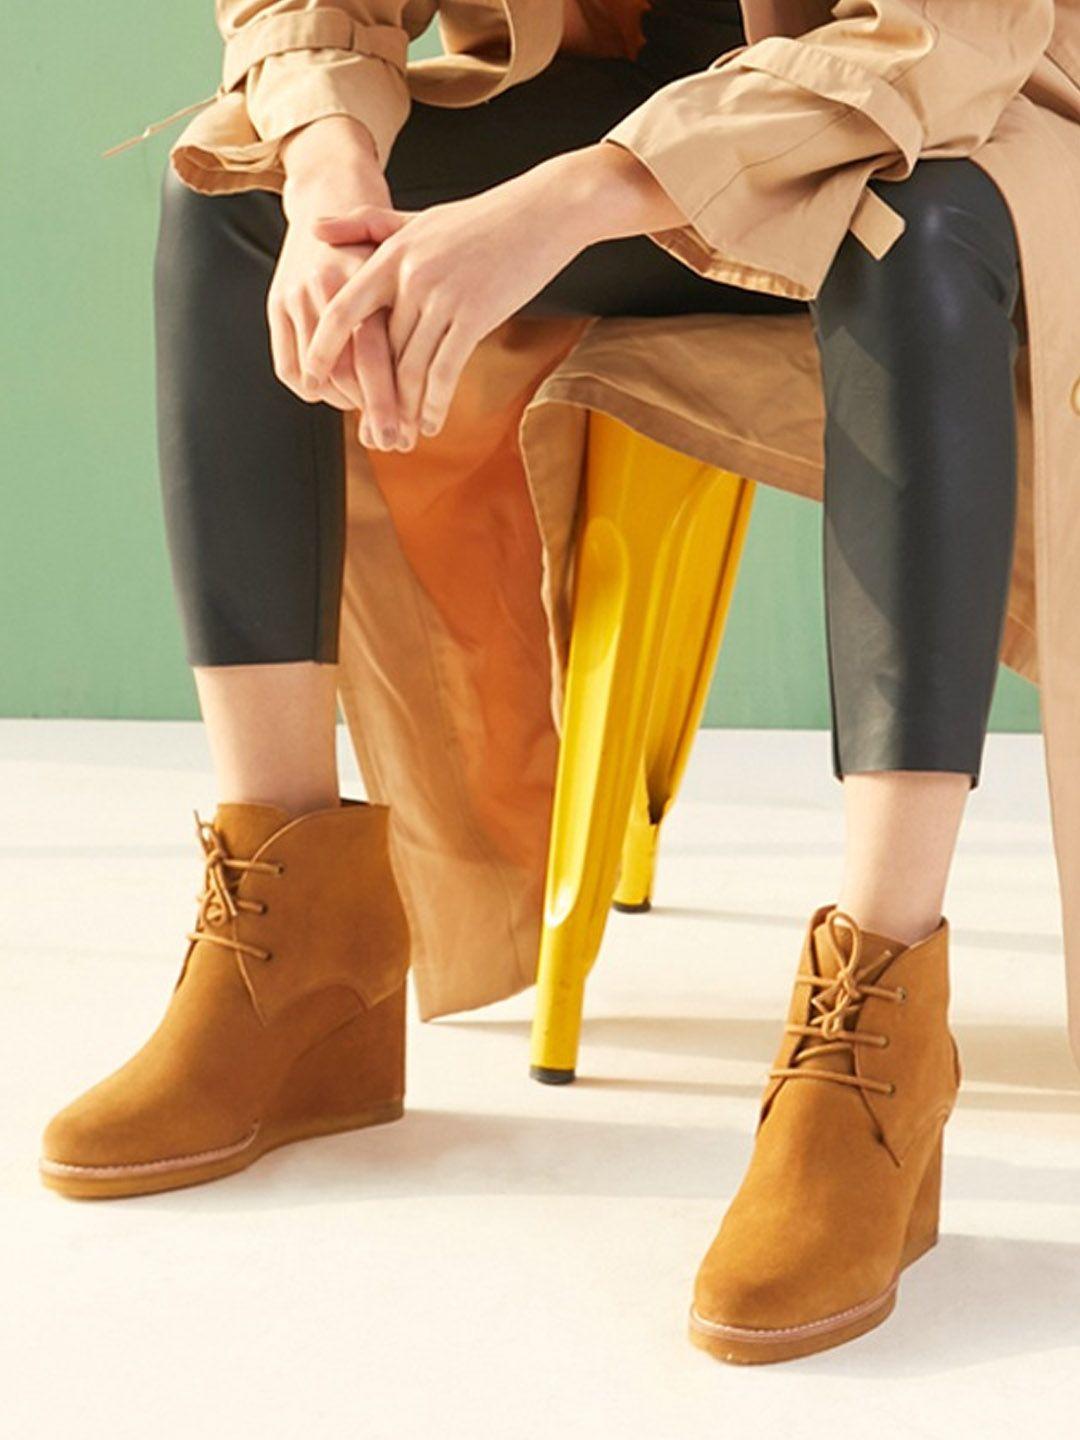 saint-g-tan-suede-leather-wedge-heeled-boots